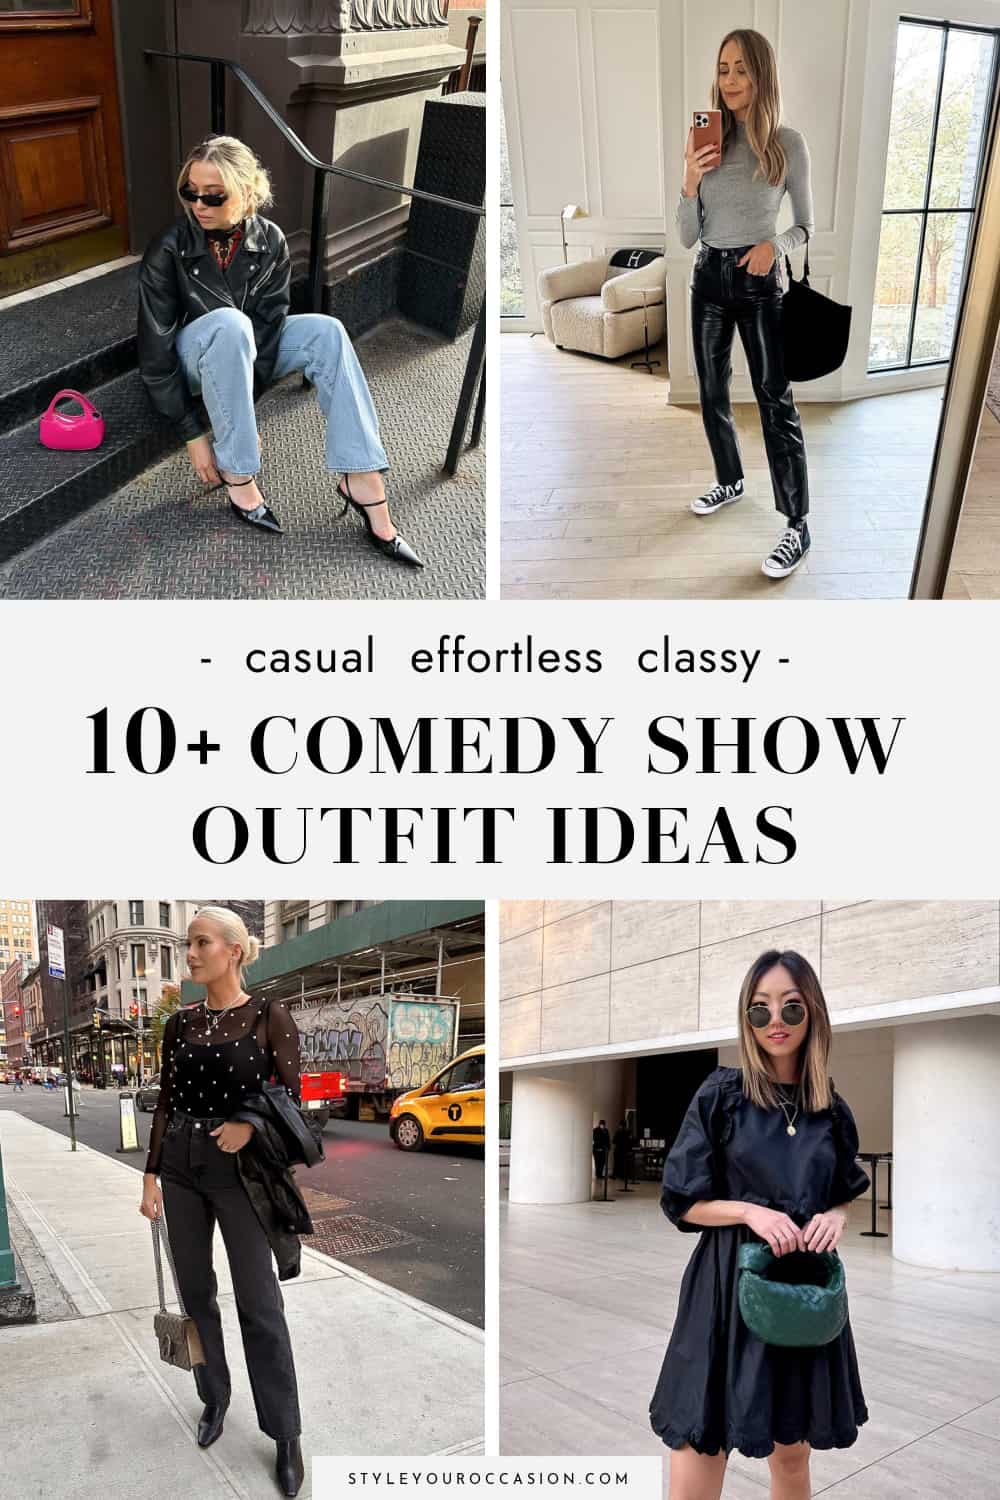 Exactly What To Wear To A Comedy Show + 10 Chic Outfit Ideas